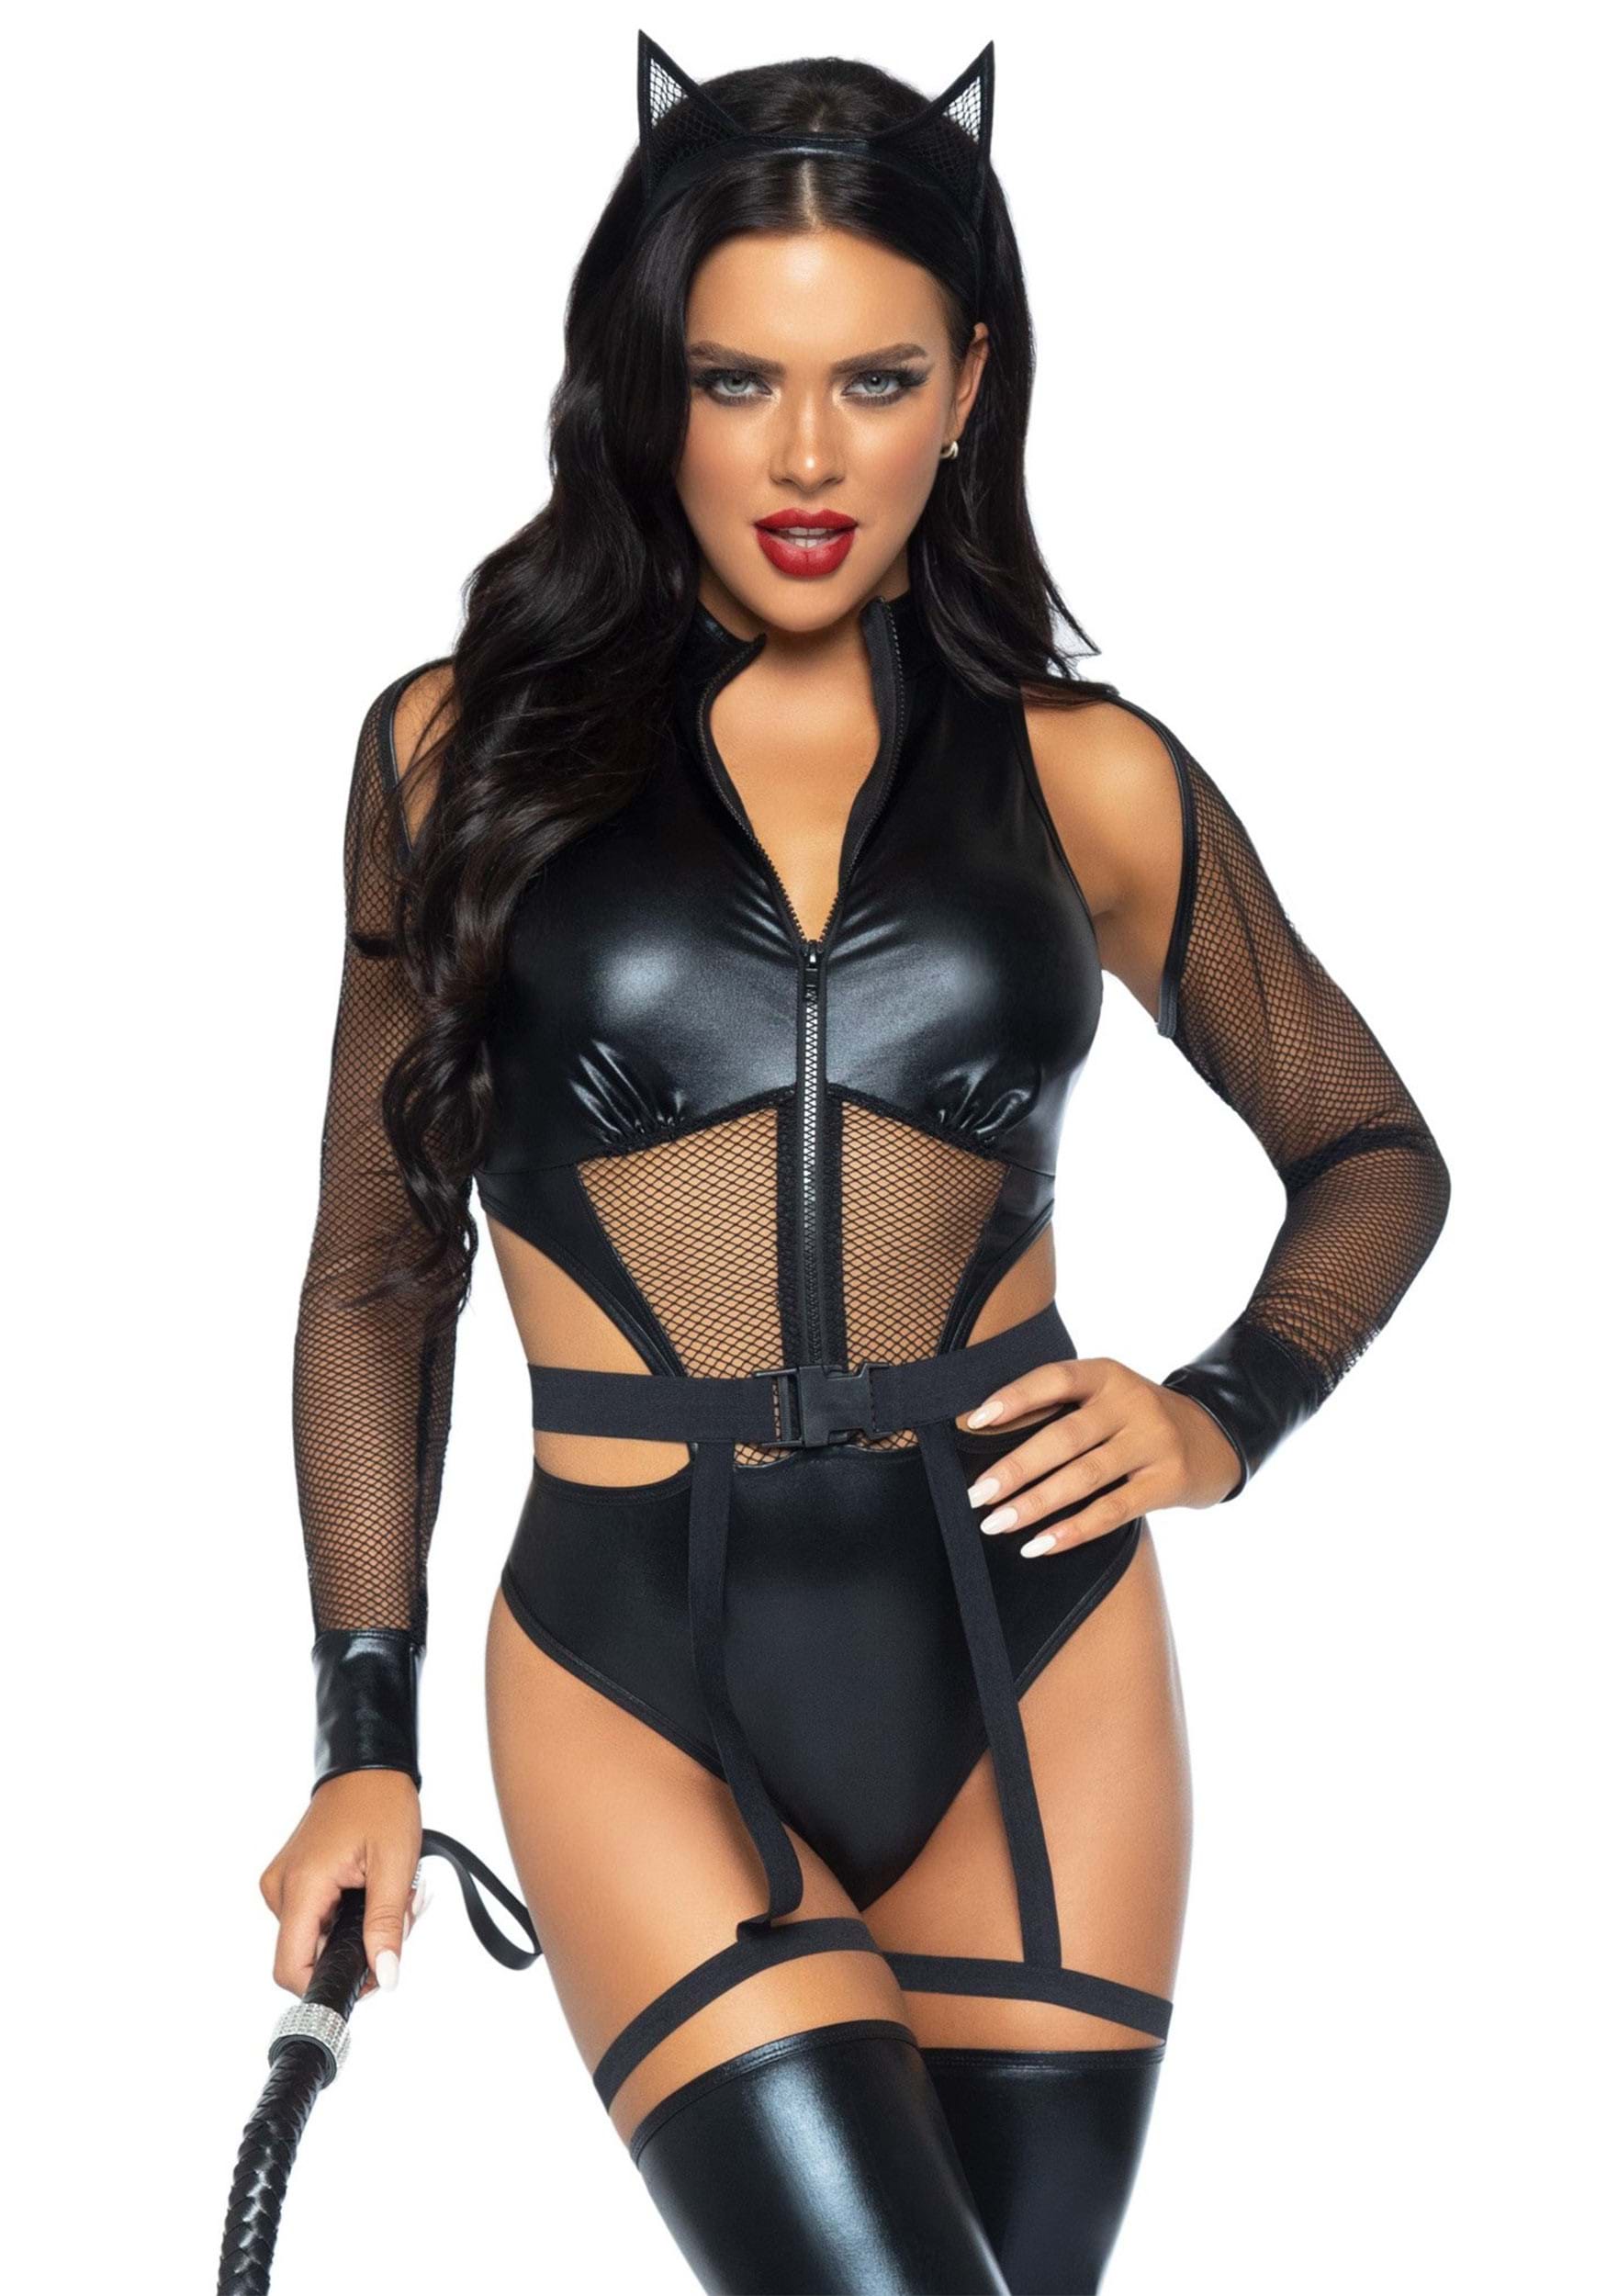 Sexy Costumes for Women, Halloween Costumes